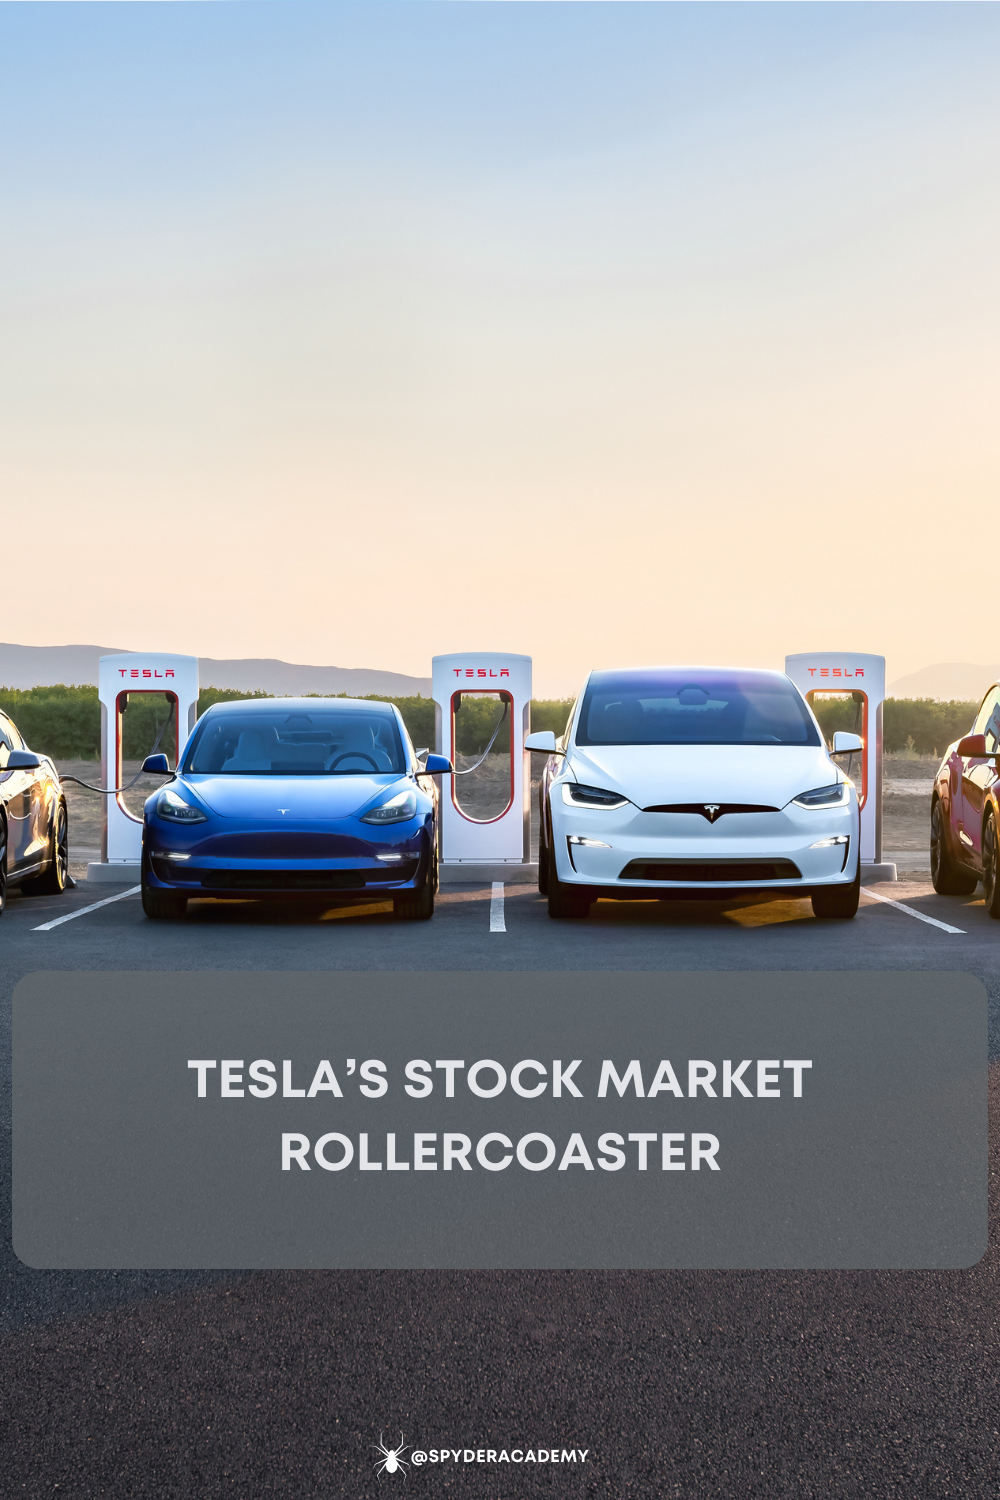 Explore the dynamic and intriguing journey of Tesla's stock in the market. From its highs and lows to its innovations and challenges, get an in-depth analysis of what influences Tesla's stock value and the future outlook.